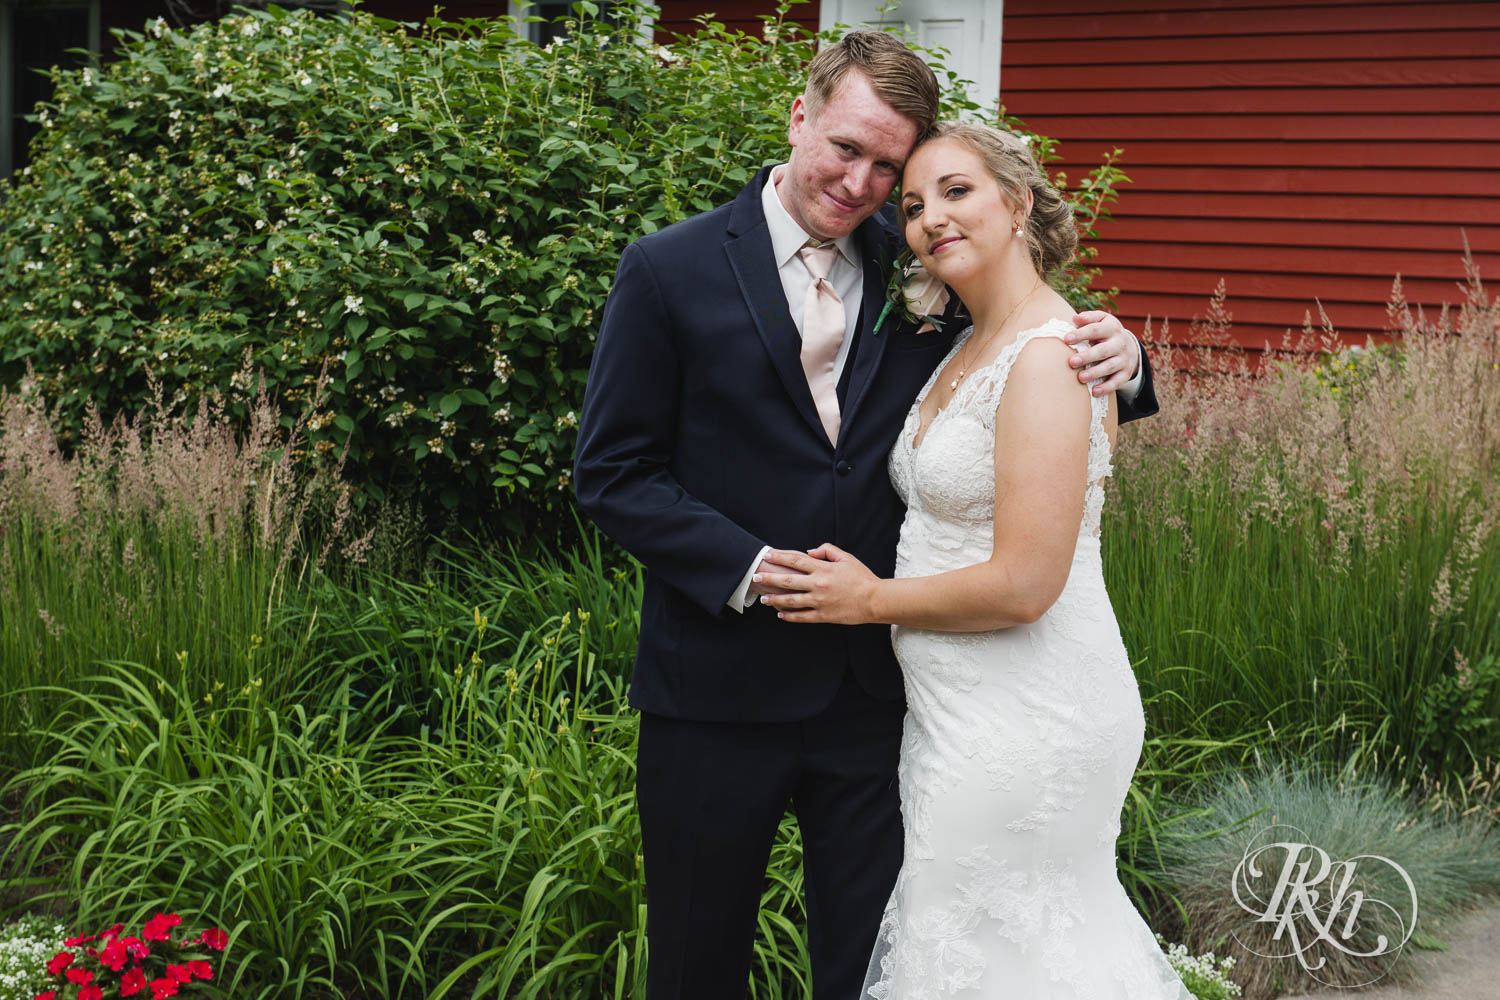 Bride and groom smile on wedding day at Earle Brown Heritage Center in Brooklyn Center, Minnesota.